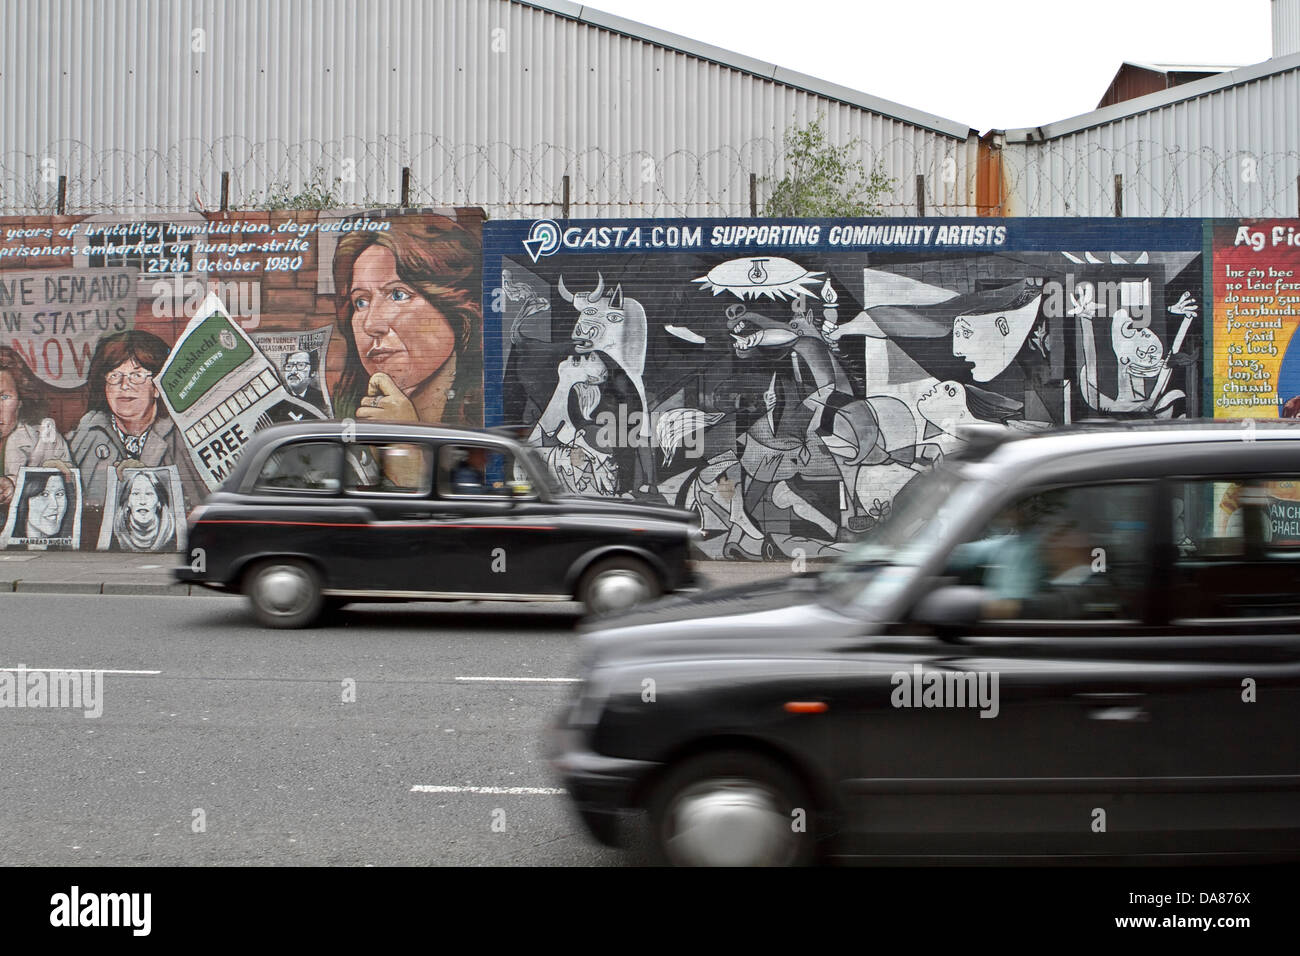 Black Cabs in front of Peace Mural in East Belfast, Northern Ireland Stock Photo